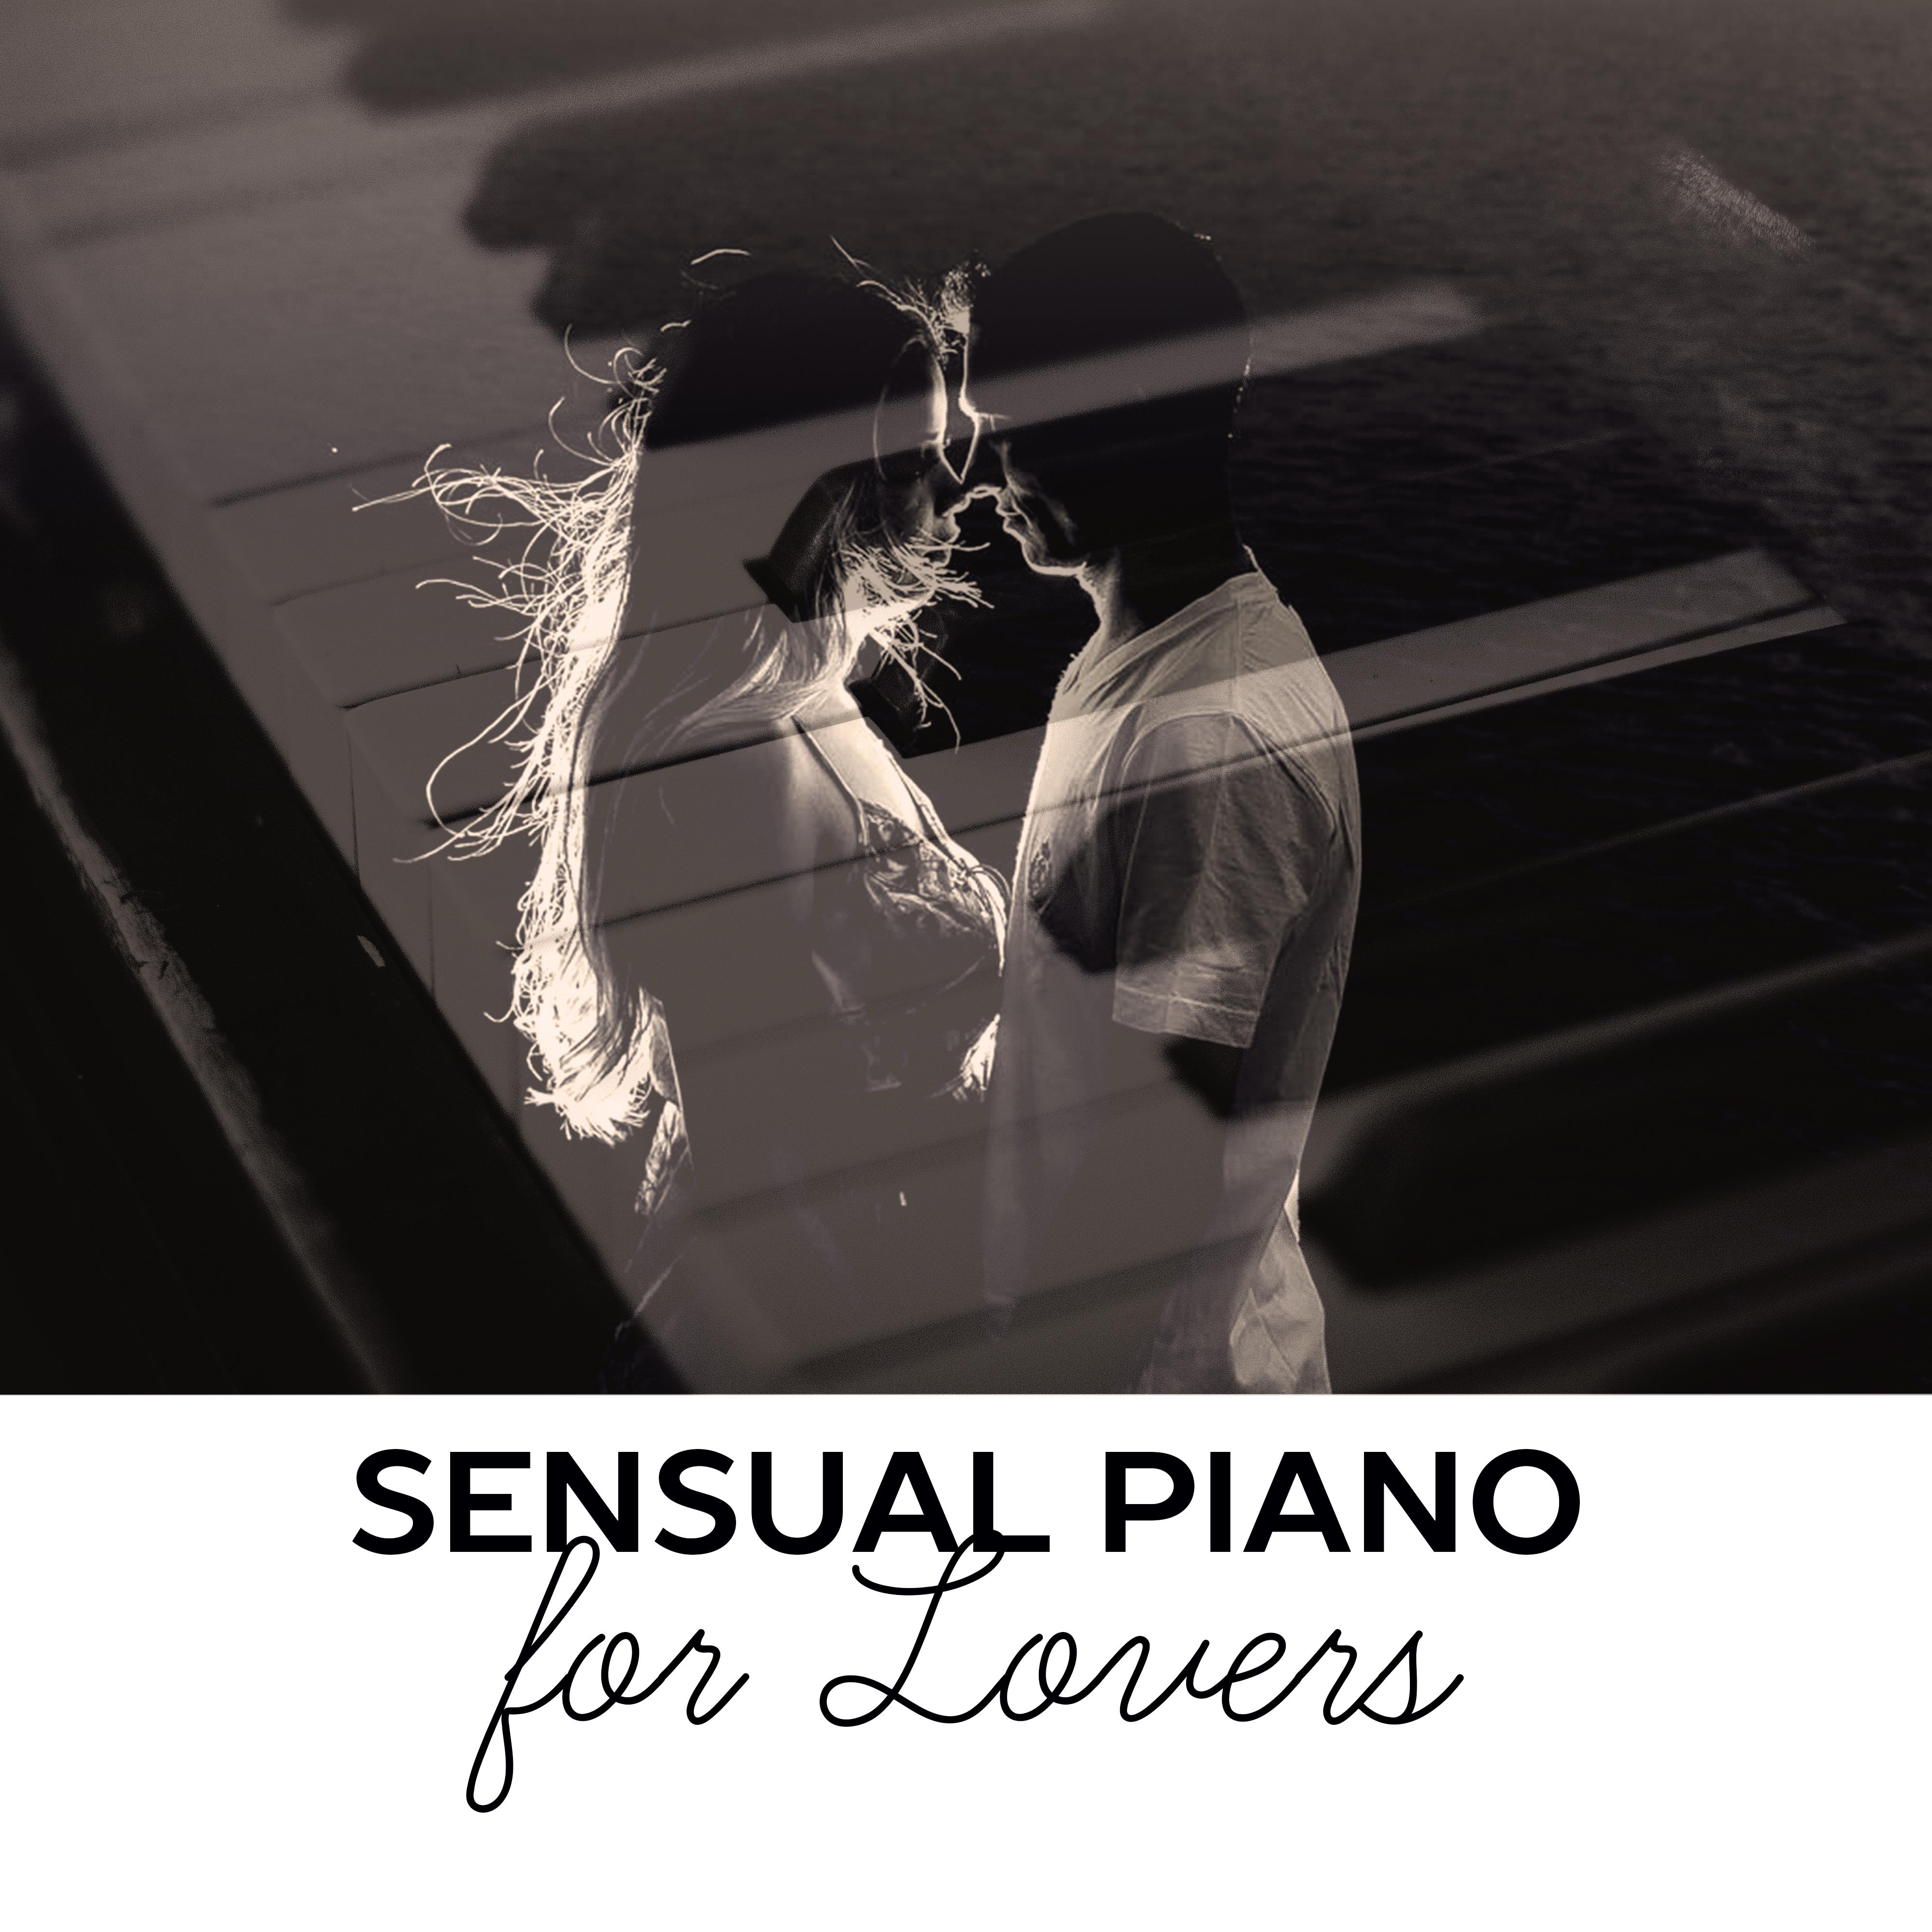 Sensual Piano for Lovers – Romantic Jazz, Relaxation Sounds, Gentle Piano, Dinner by Candlelight, Instrumental Songs at Night, Calmness & Love